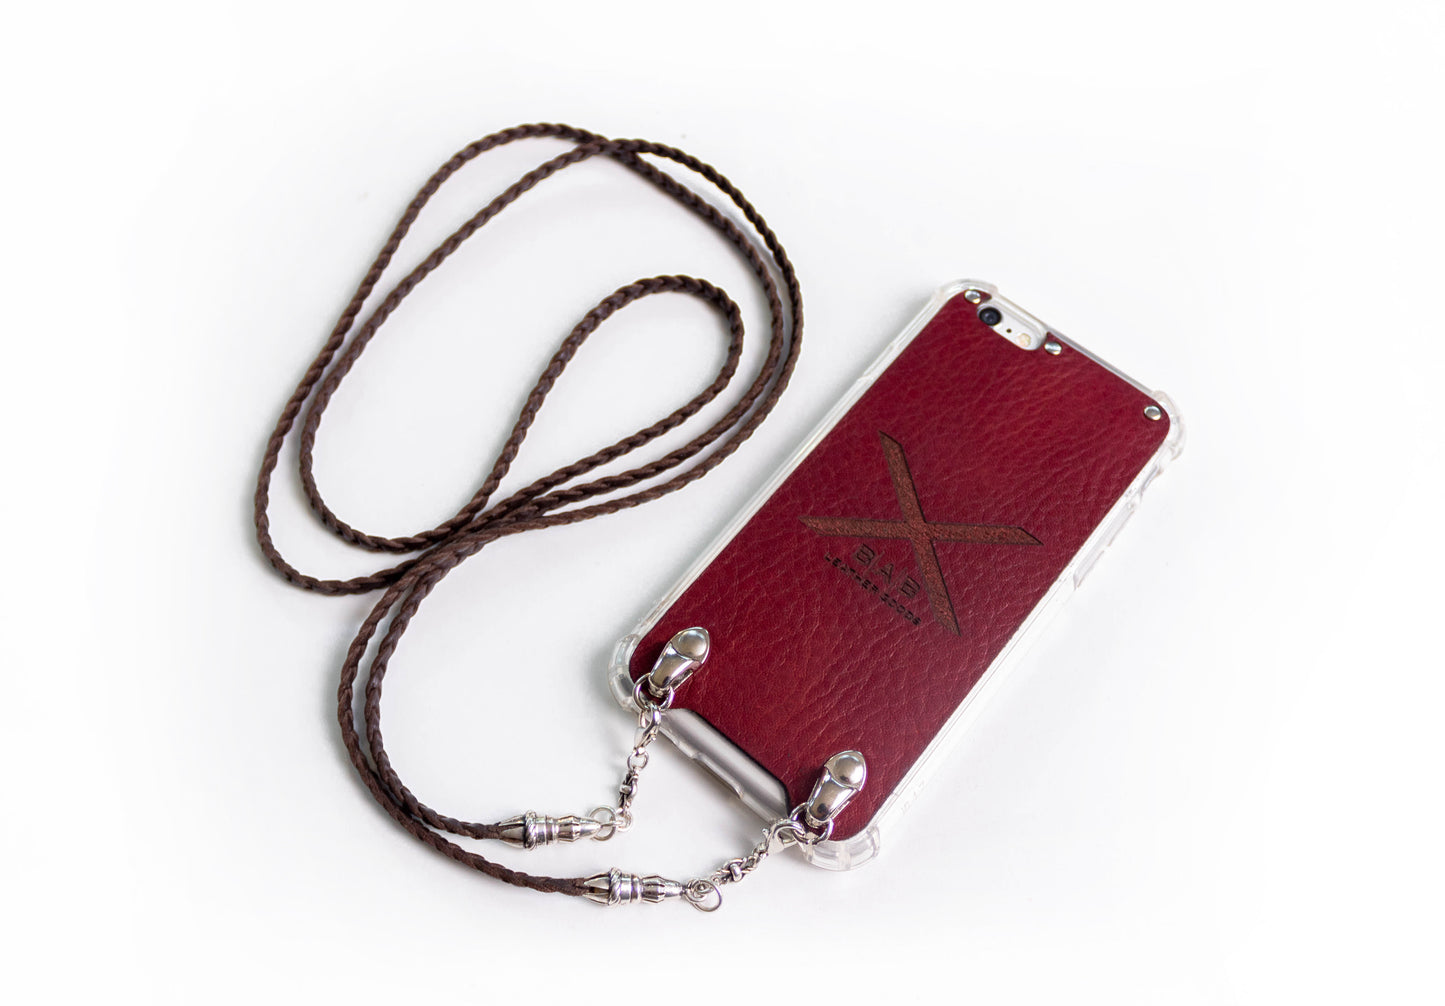 Full-Grain Genuine vegetable-tanned Leather & 925 Sterling Silver Case for iPhone. Bracelet/Crossbody/Necklace 3 double strands of Hand-braided Leather, Brown or Black.- F14​